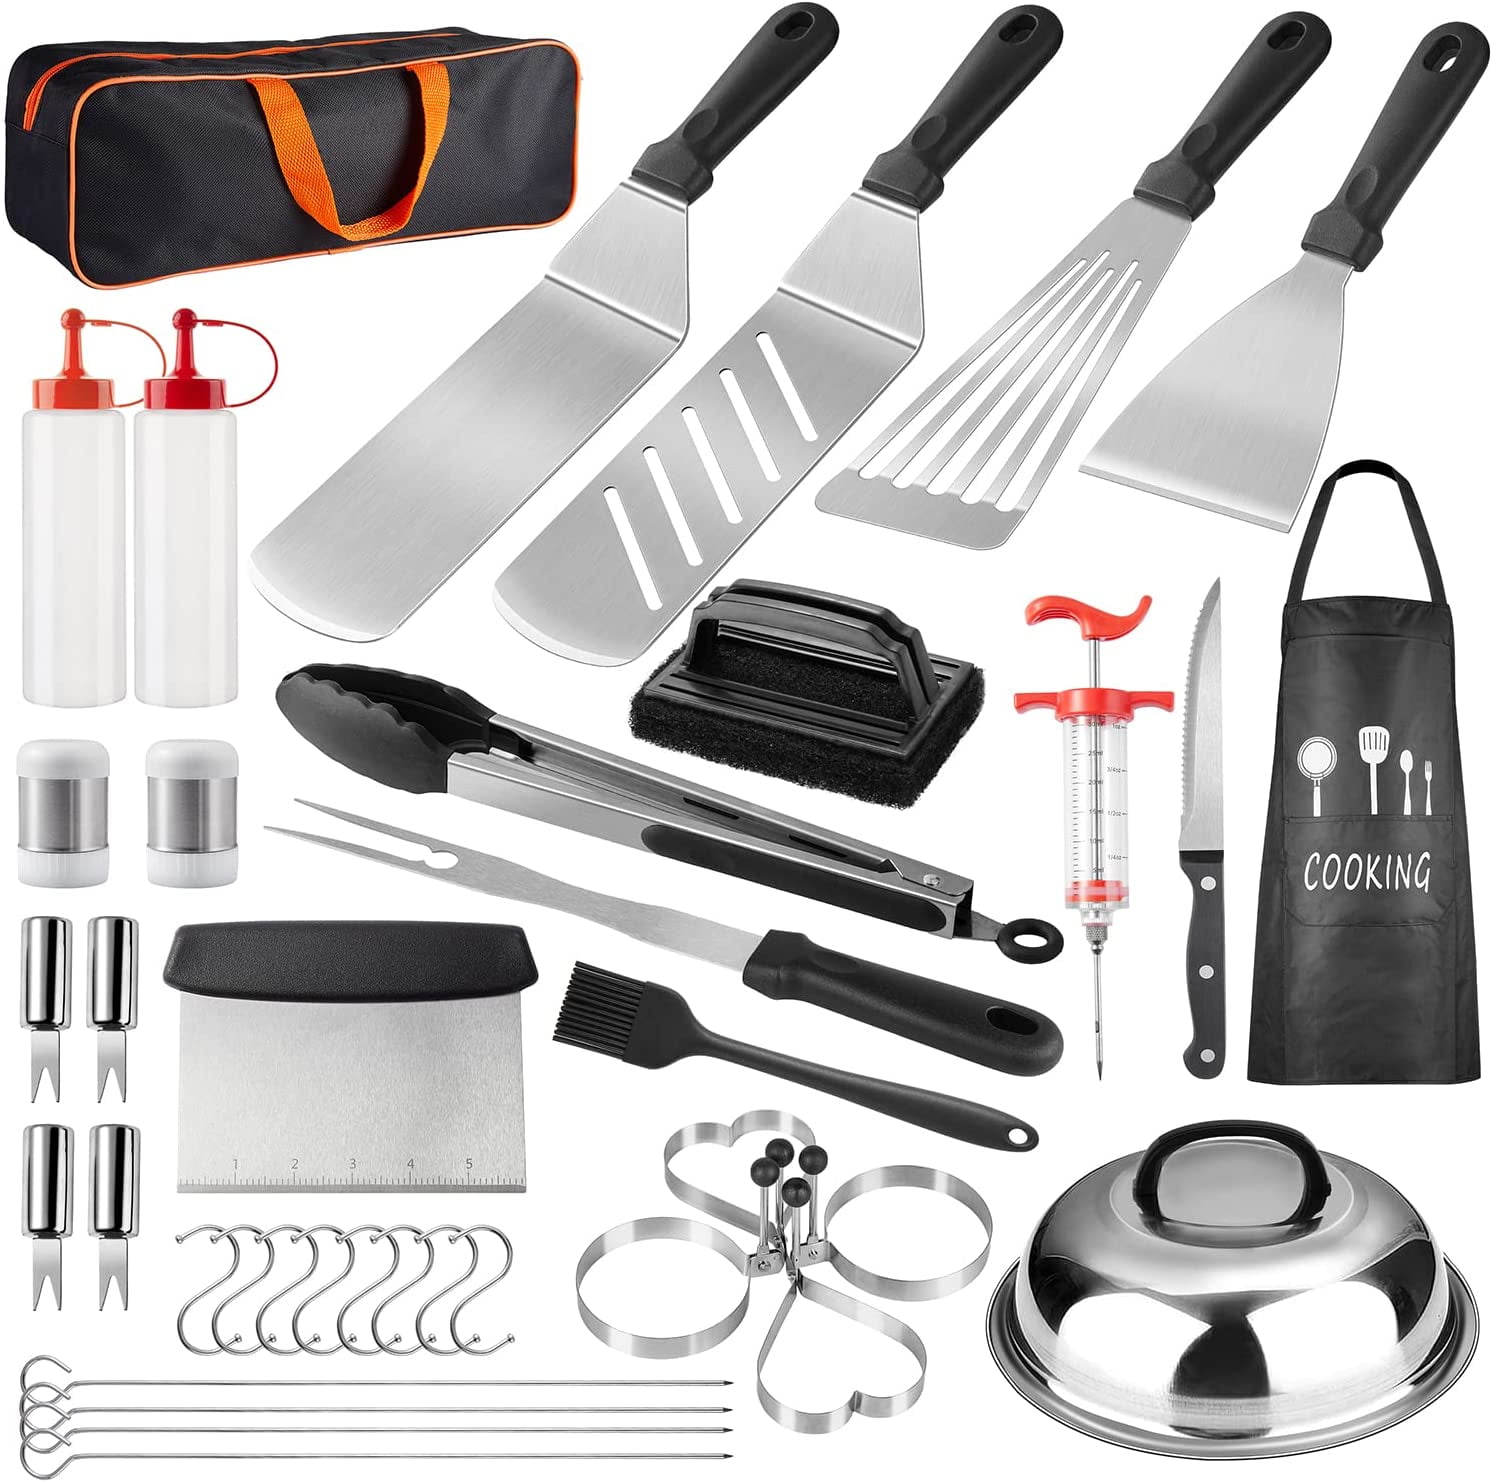 34 Pcs Griddle Accessories Kit, Flat Top Grill Tools Set for Blackstone, Camp Chef, Etc, Grilling Spatula, Scraper, Carry Bag, Cleaning Accessories